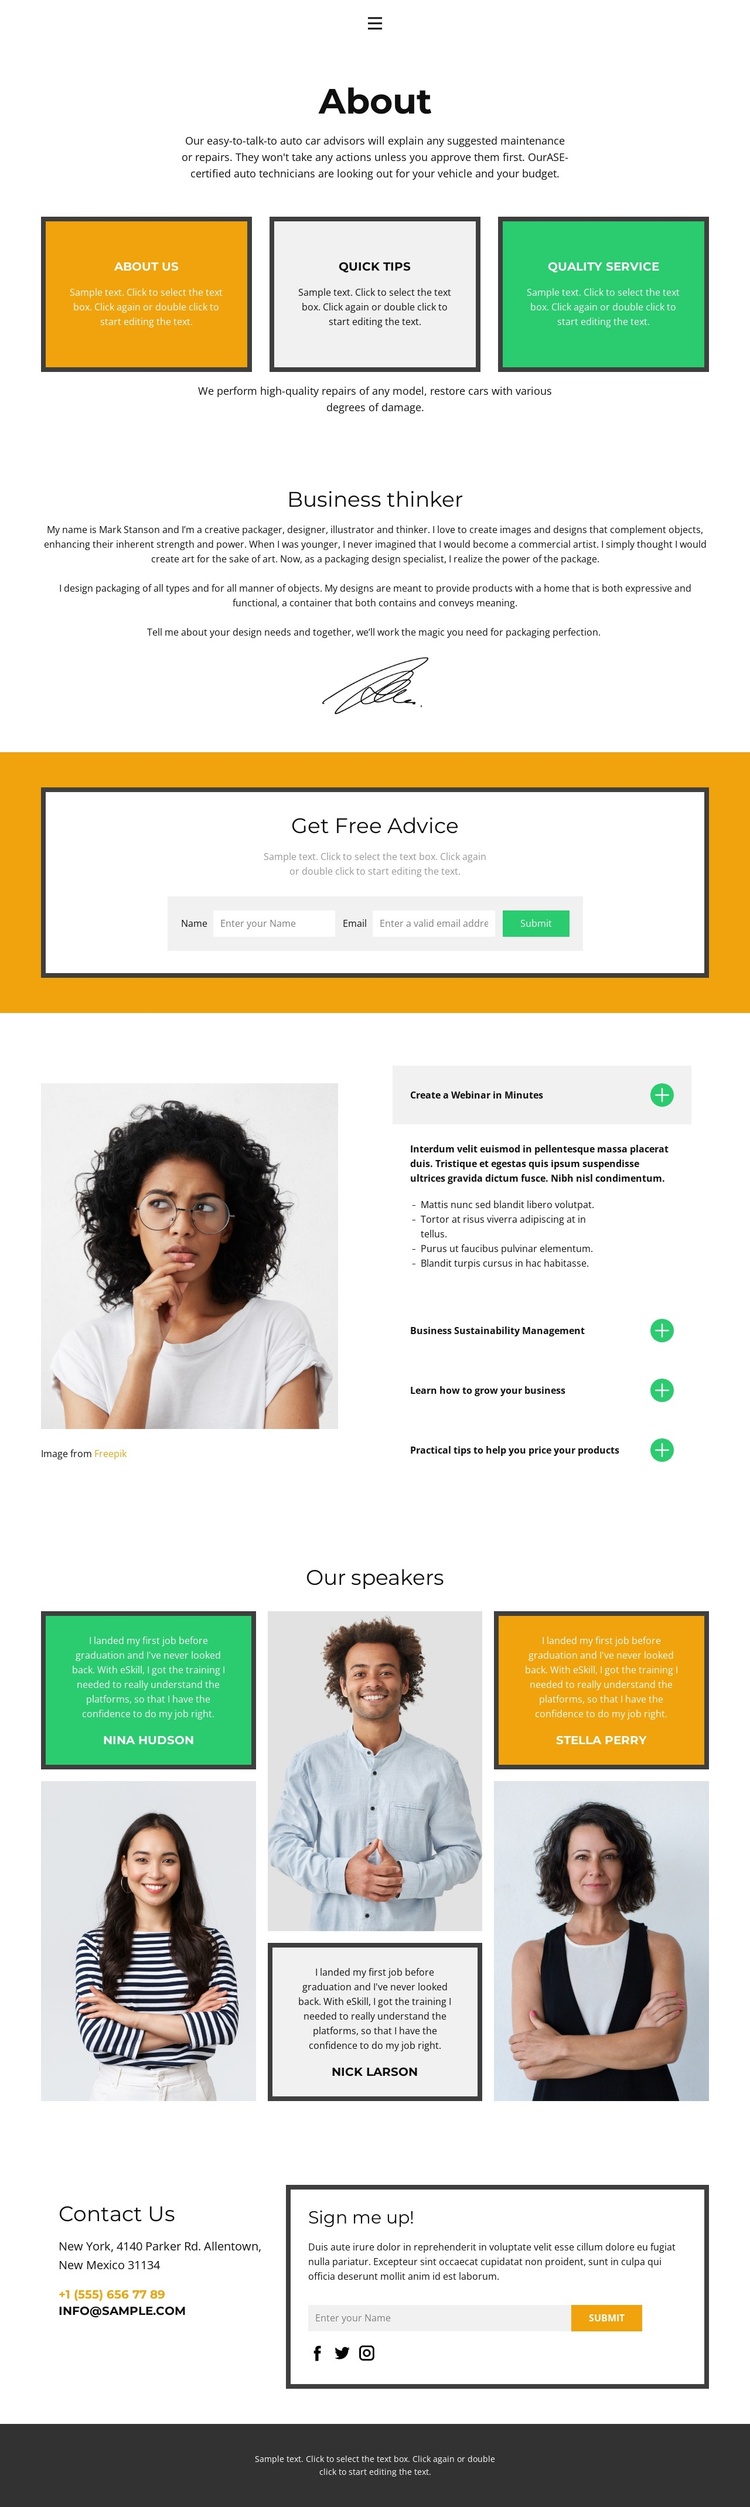 Read and find answers Joomla Template